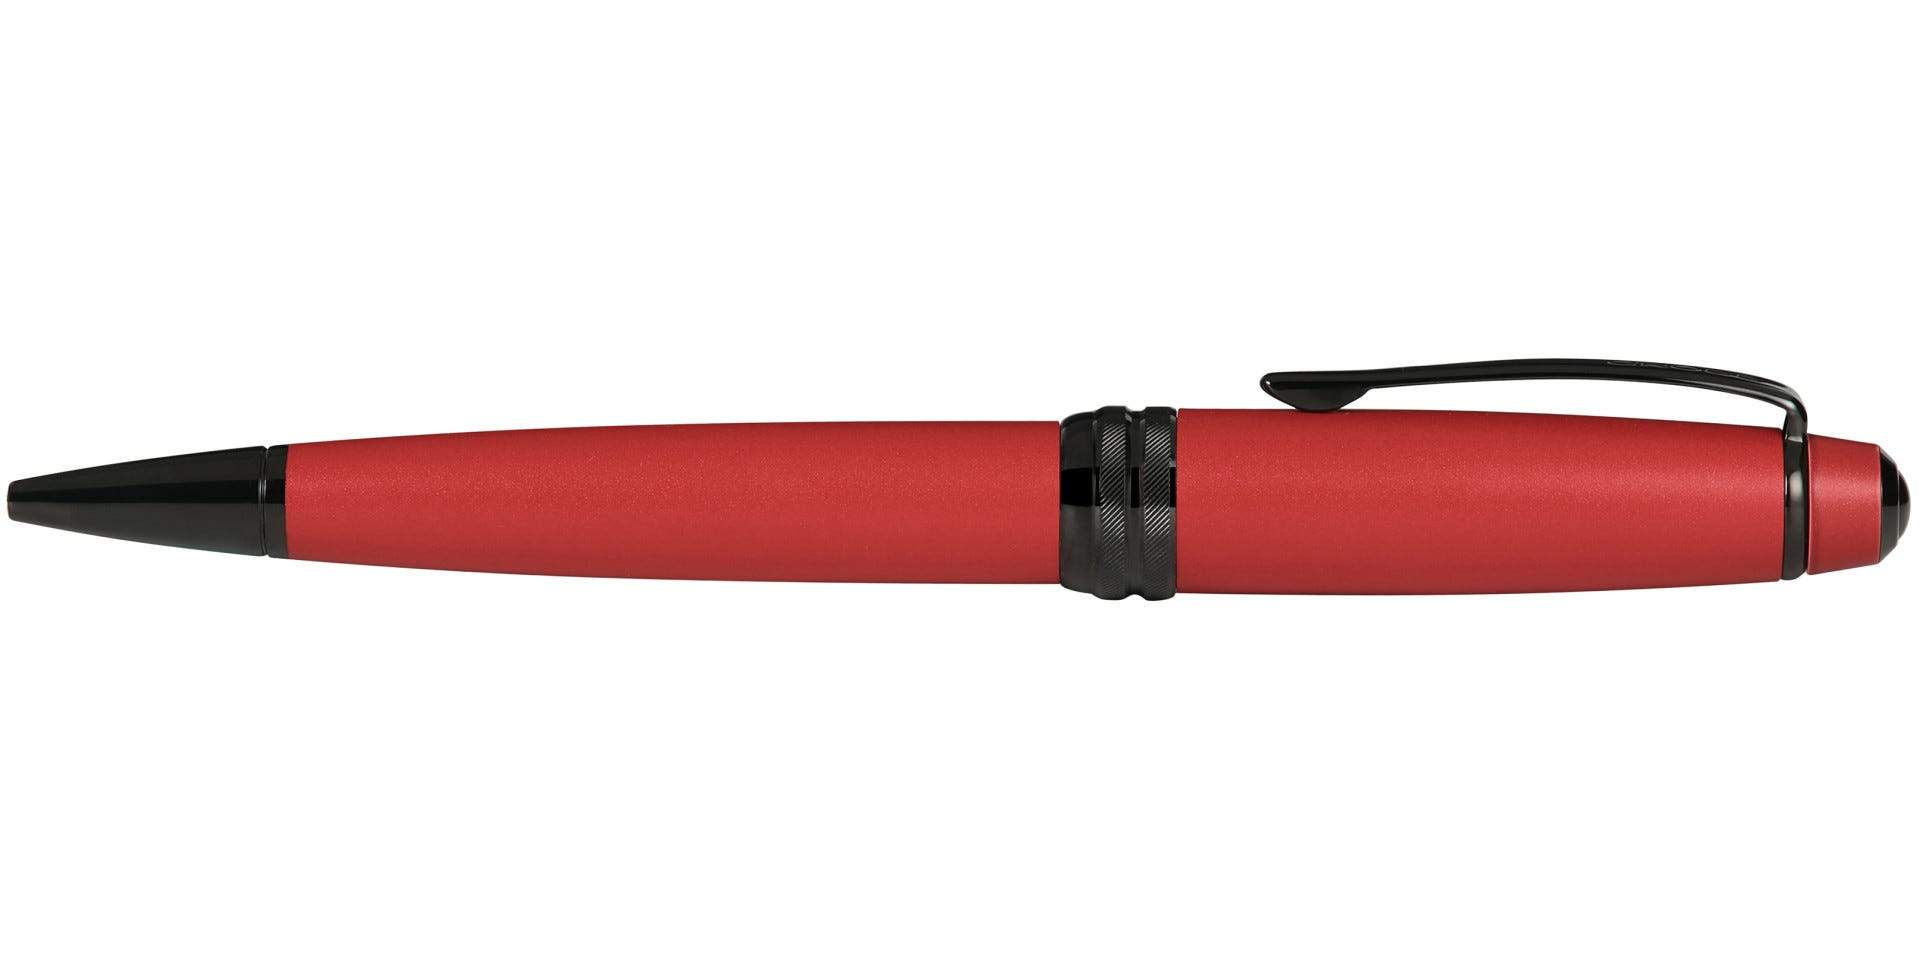 Cross Bailey Matte Red Lacquer Ballpoint Pen - AT0452-21